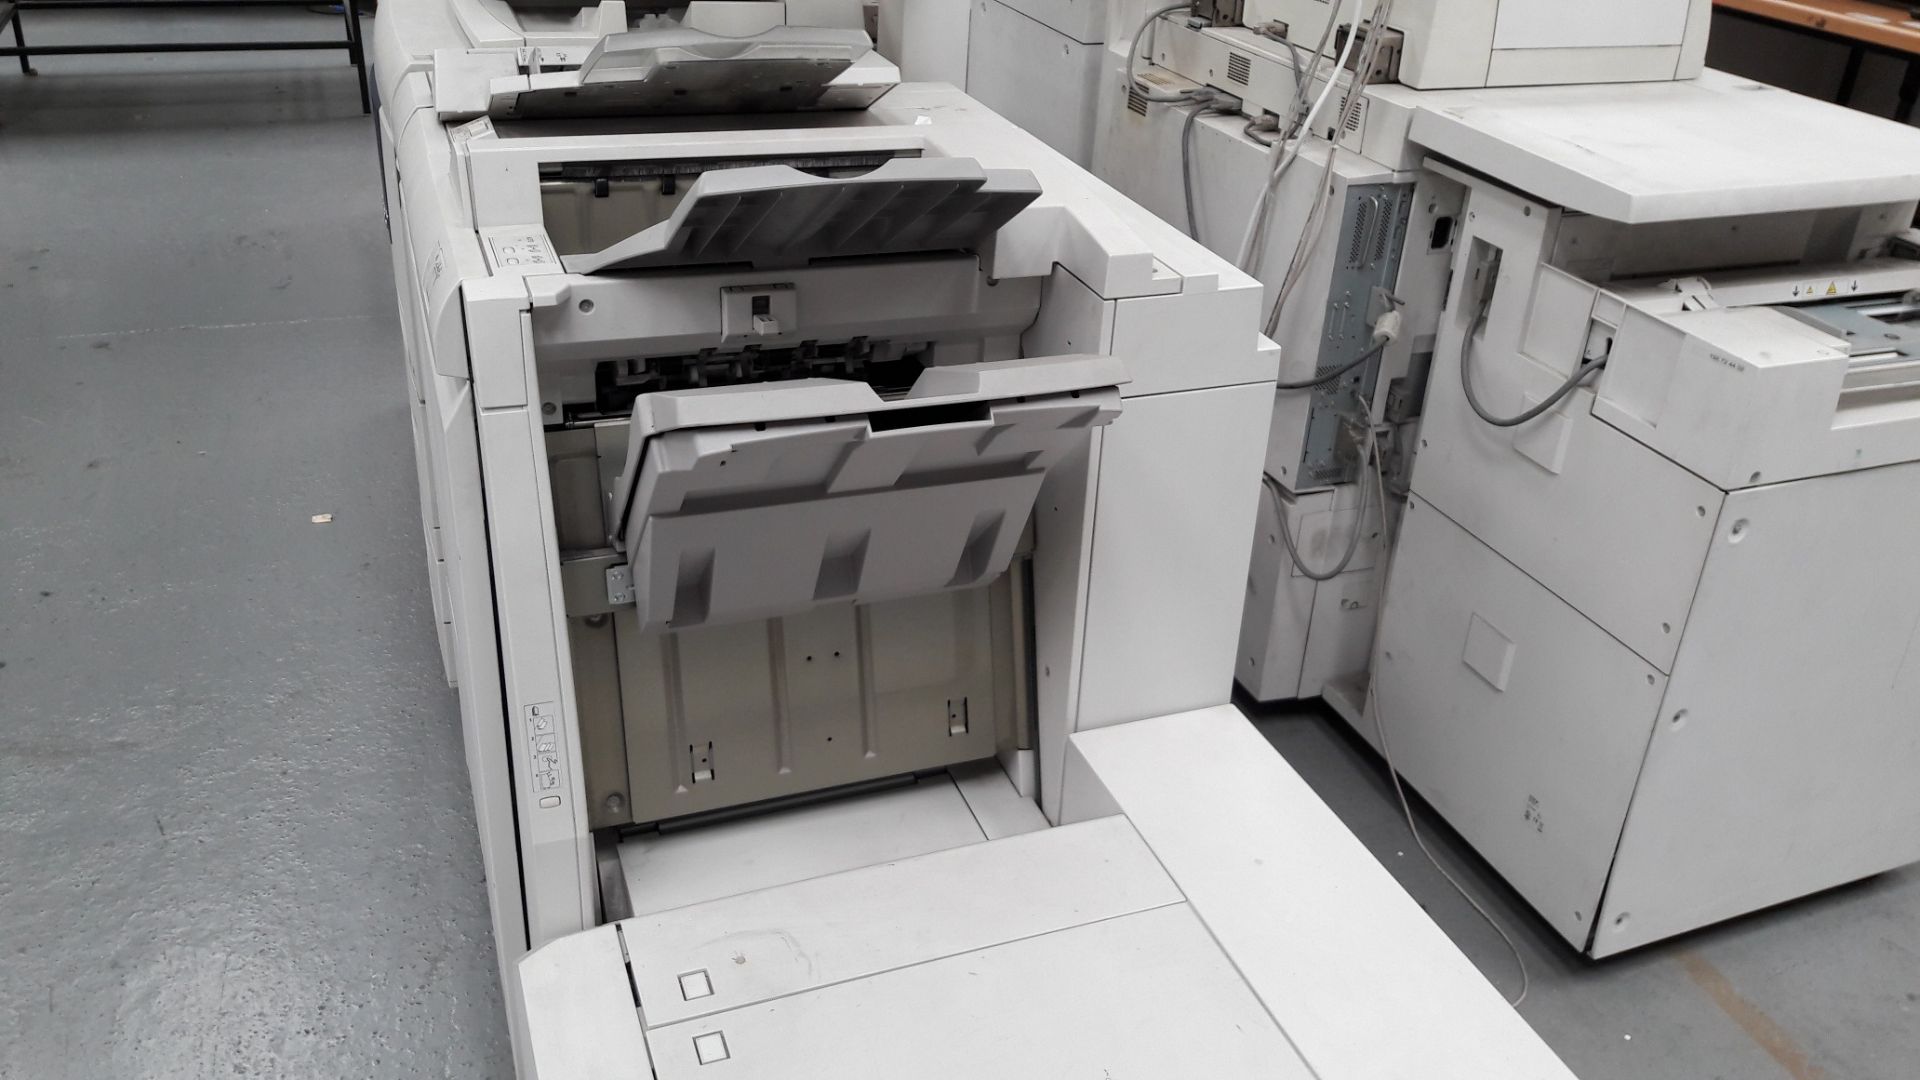 Xerox 4127 high speed copier printer with 7 drawers and 2 tray sorter - Image 3 of 6